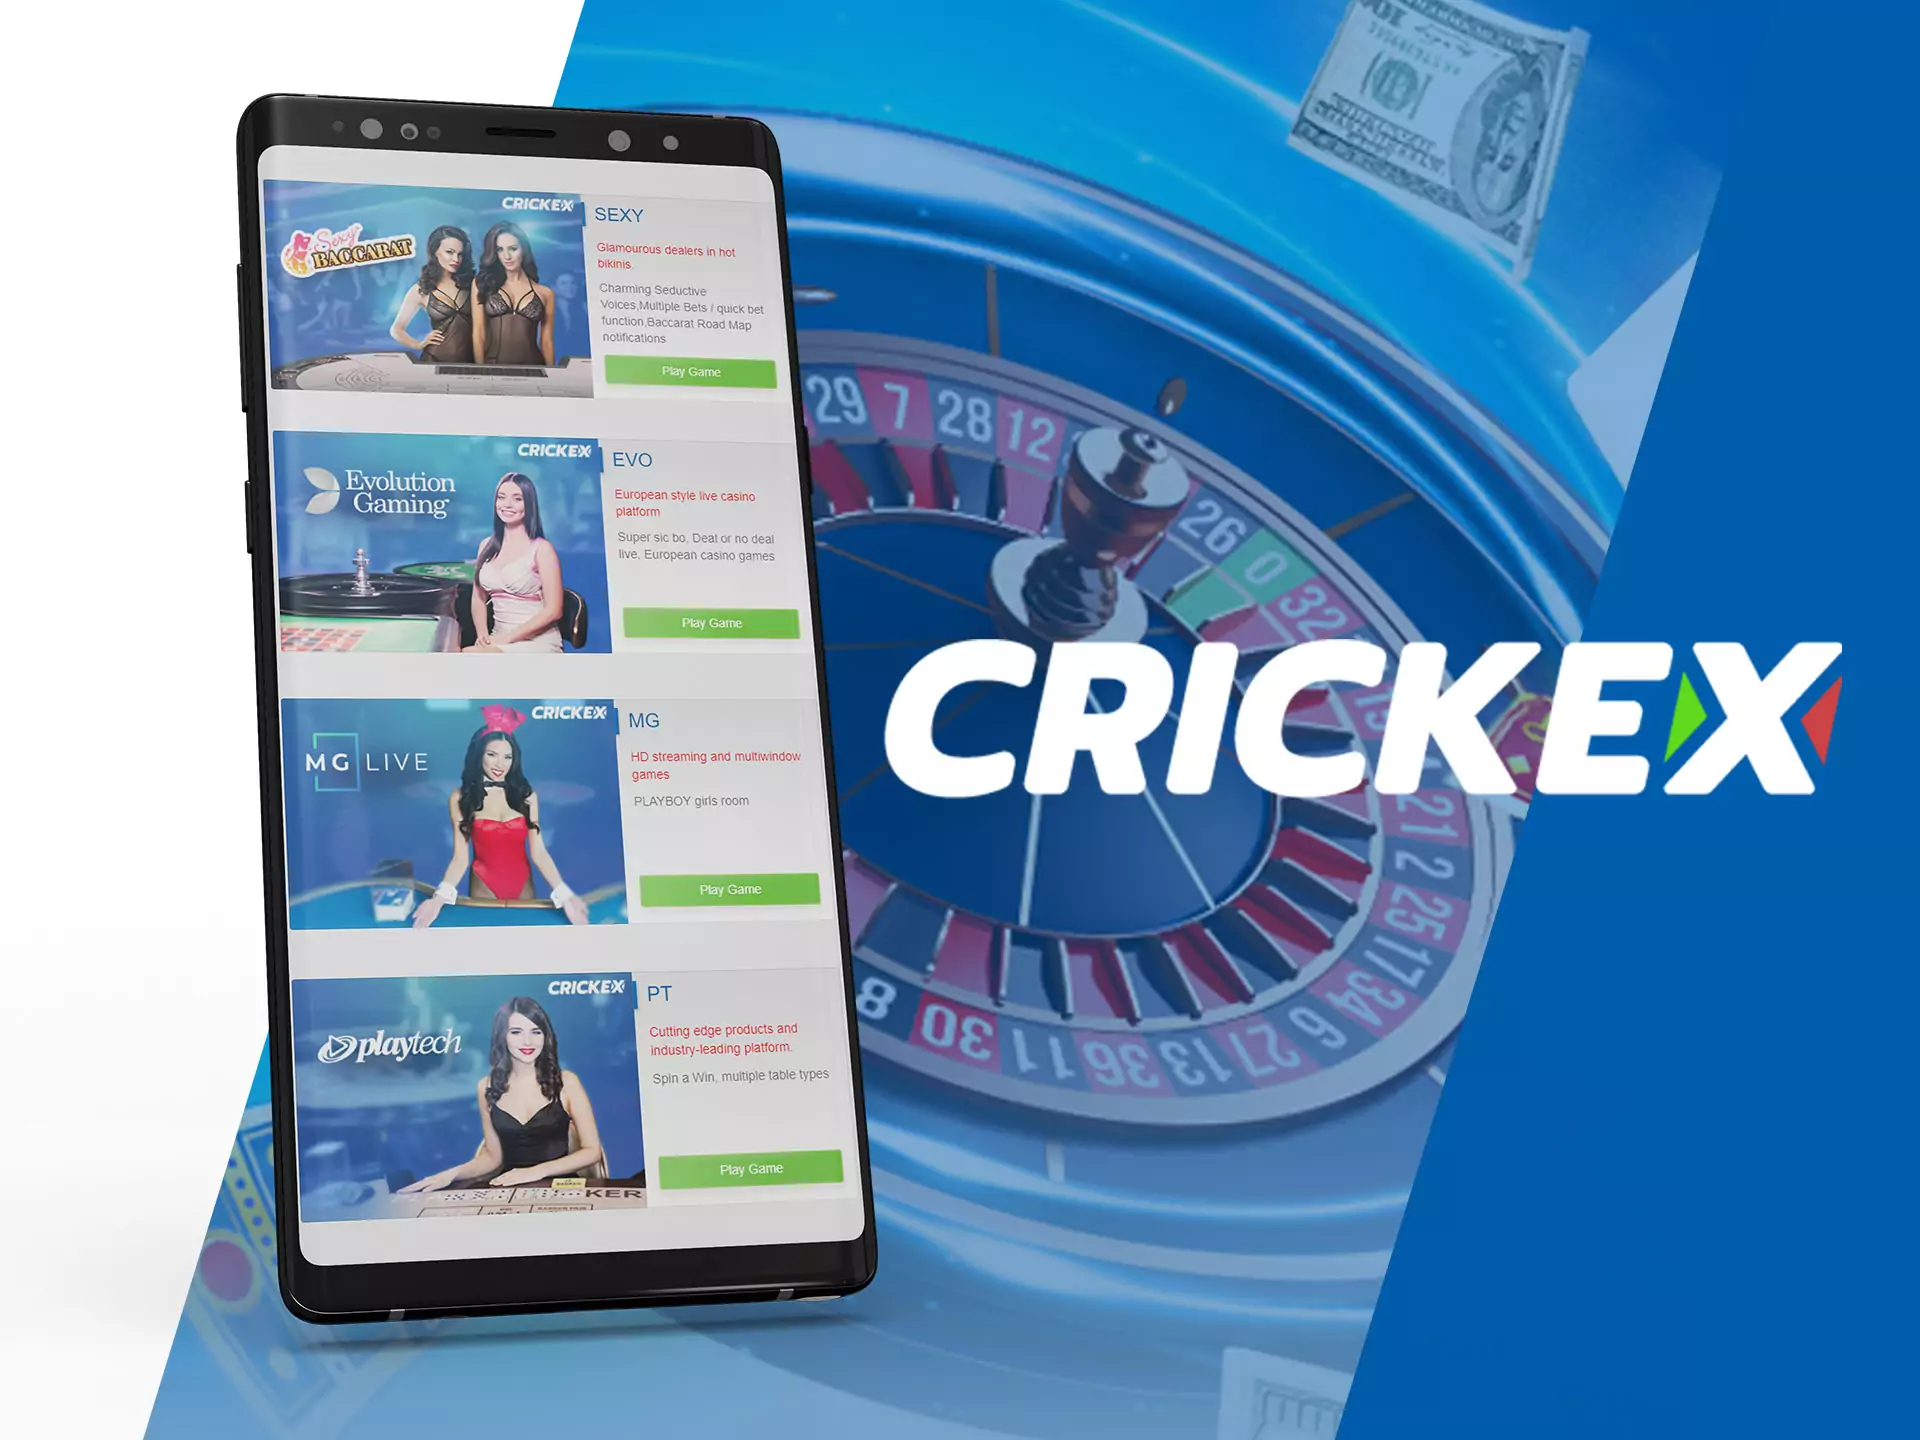 Crickex offers the ability to play online casino games through the app.